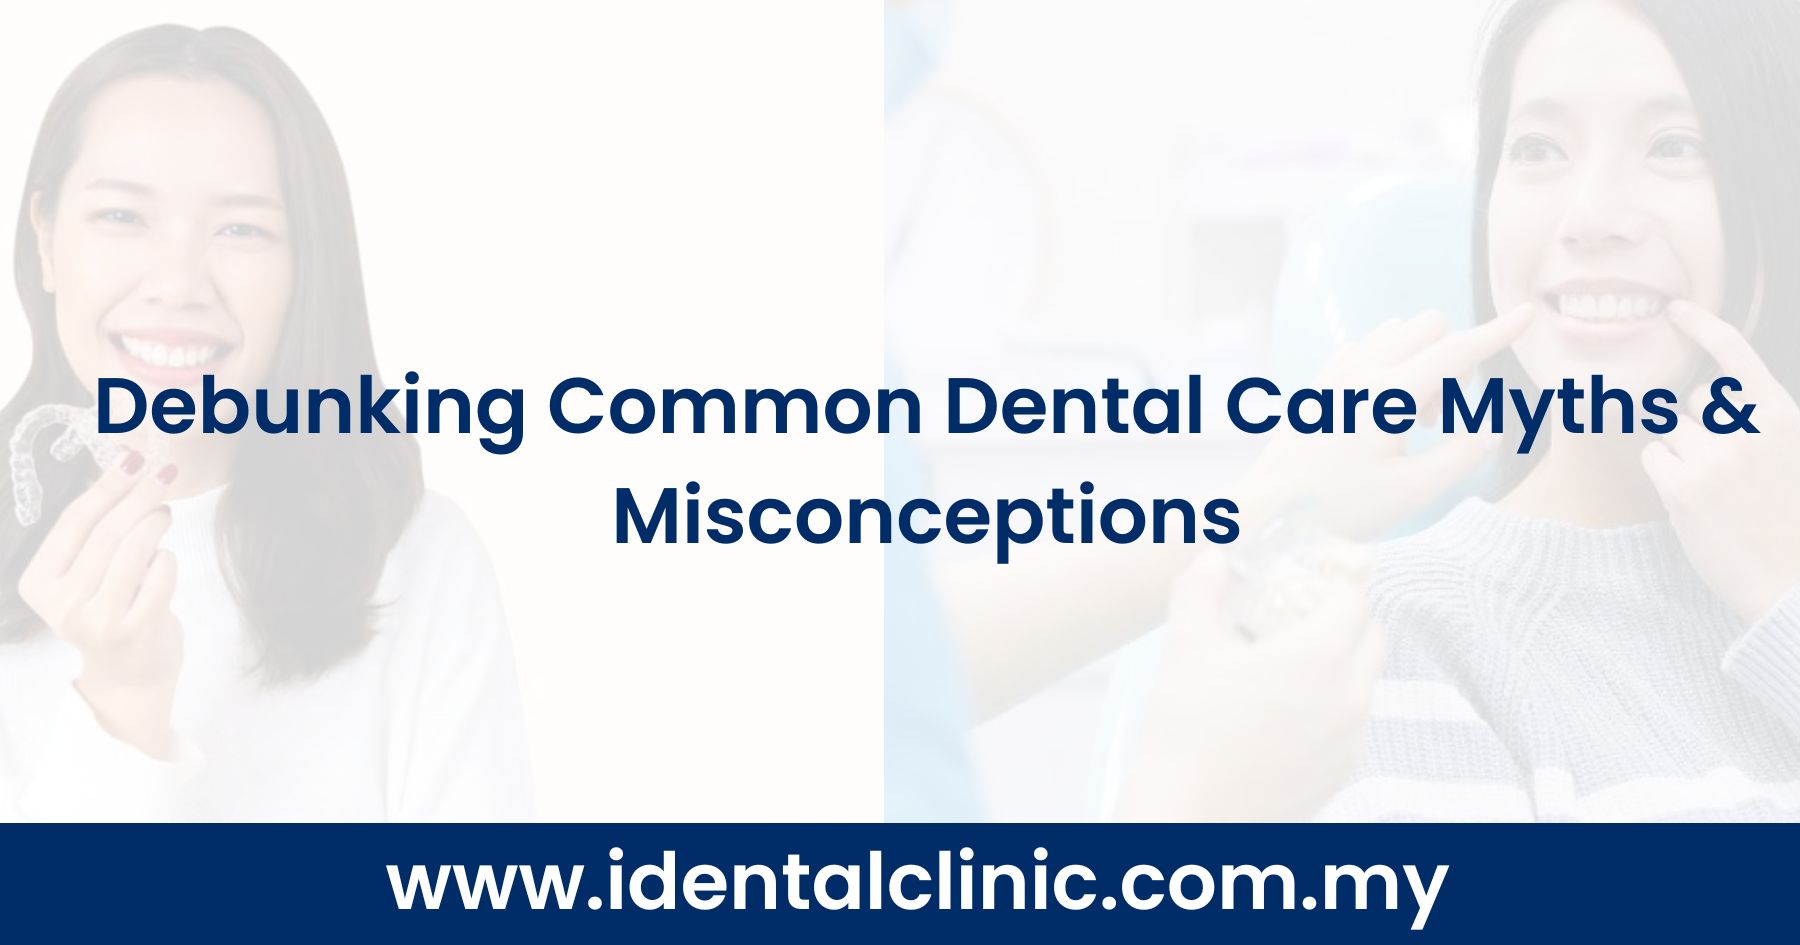 Debunking Common Dental Care Myths & Misconceptions